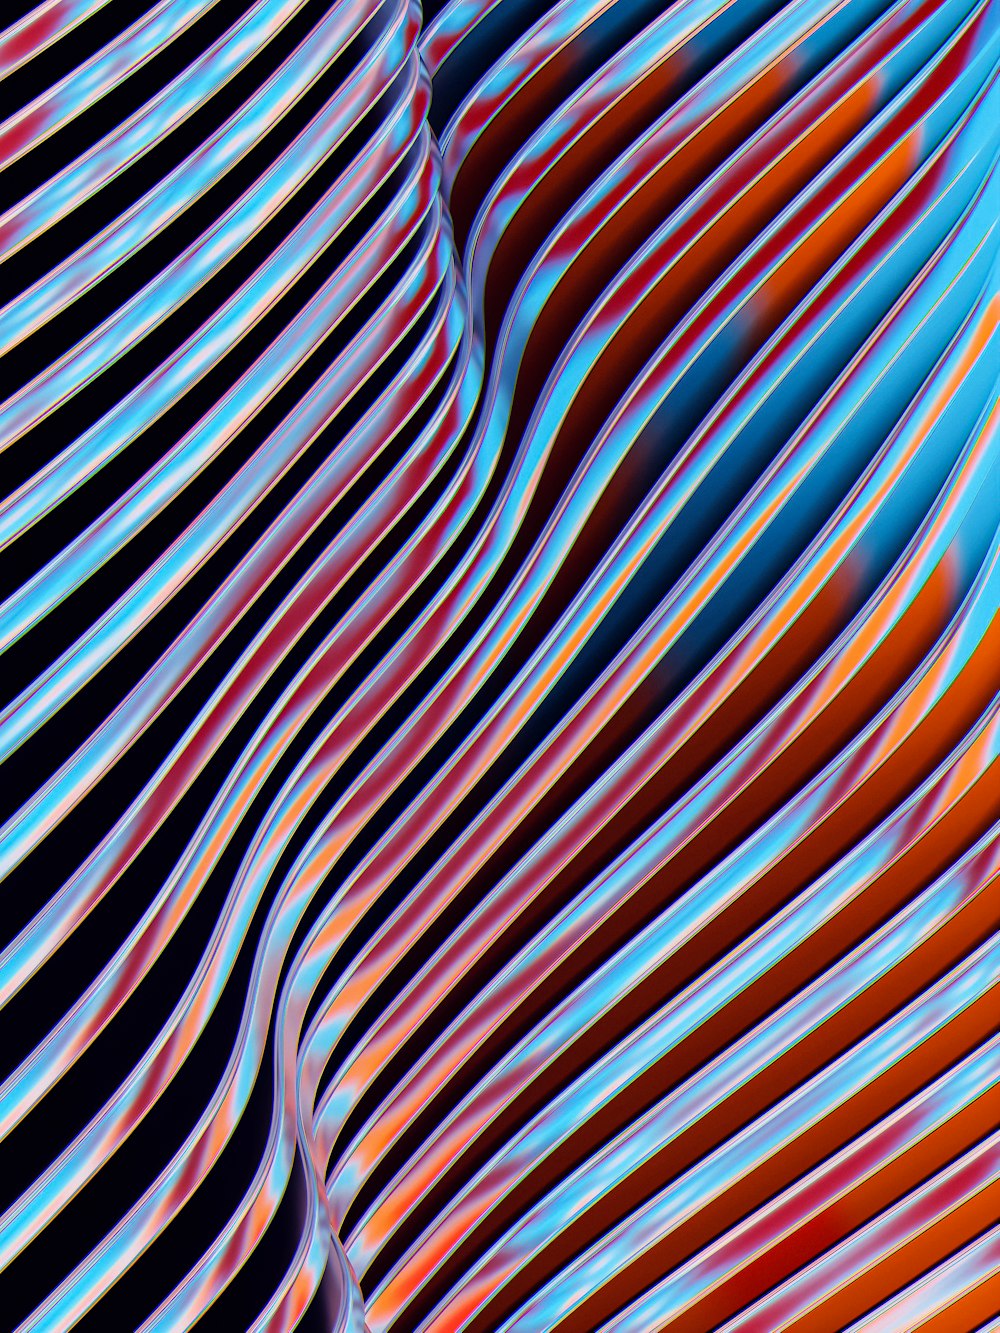 an abstract image of lines and curves in blue, orange, and red